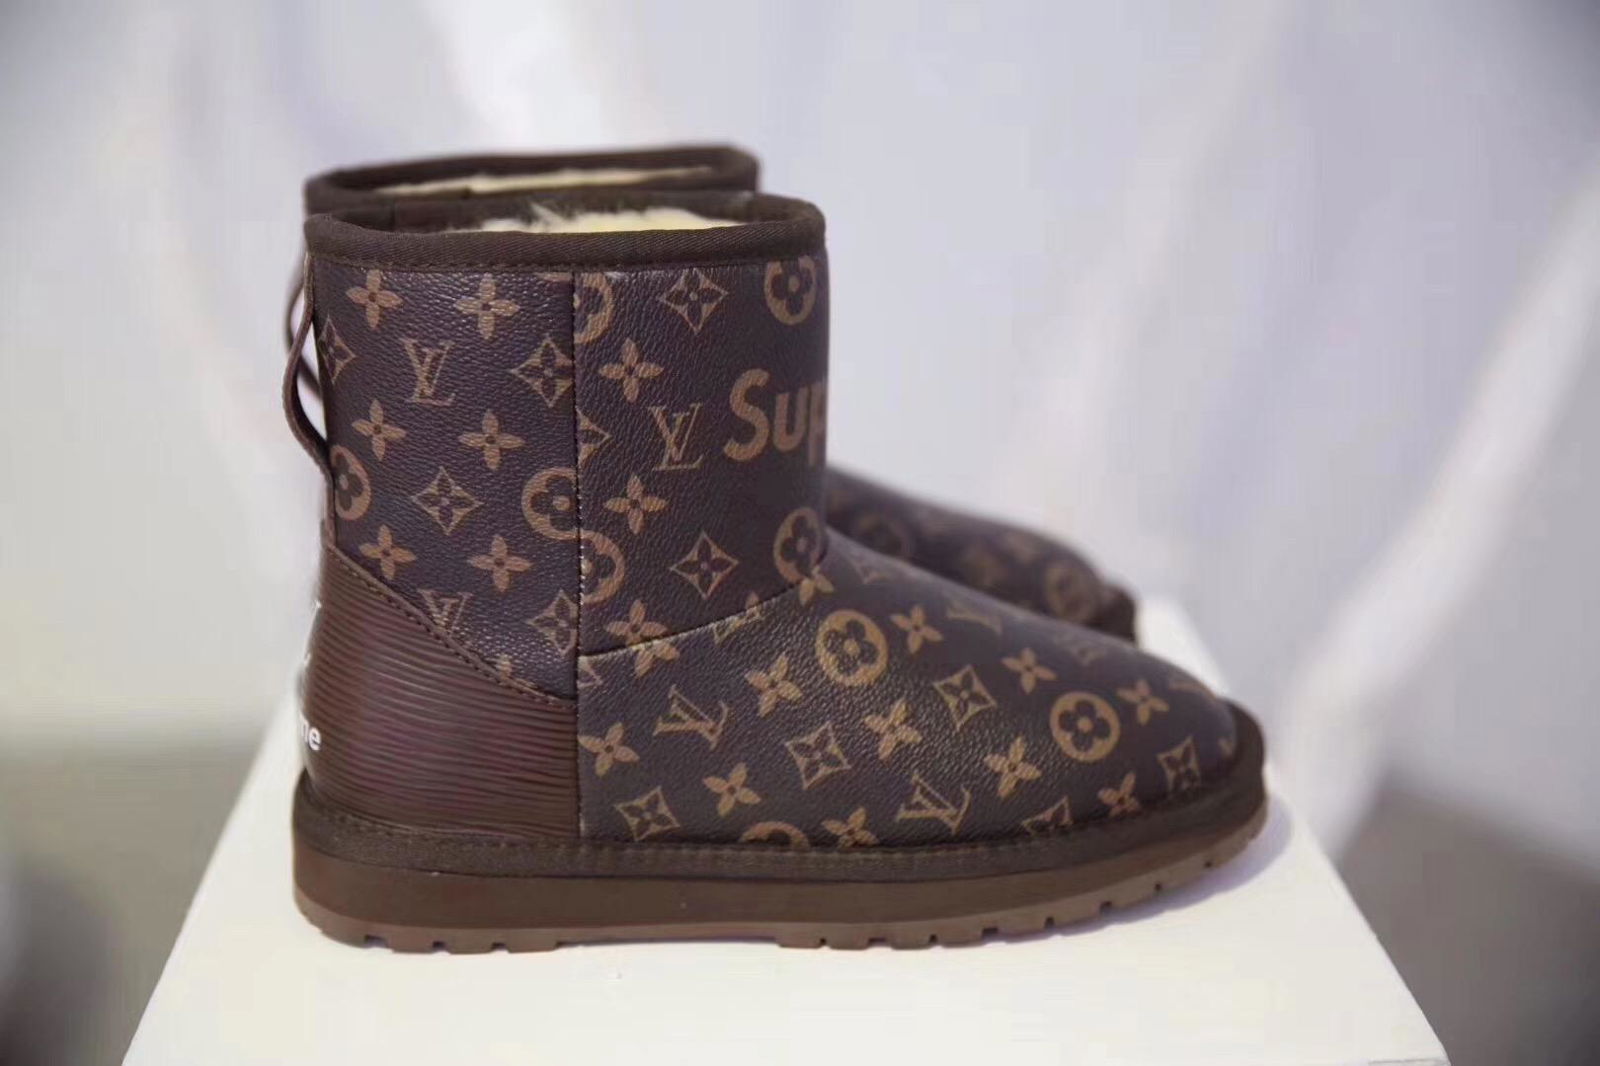 Cheap Louis Vuitton Sneakers For Women | Confederated Tribes of the Umatilla Indian Reservation